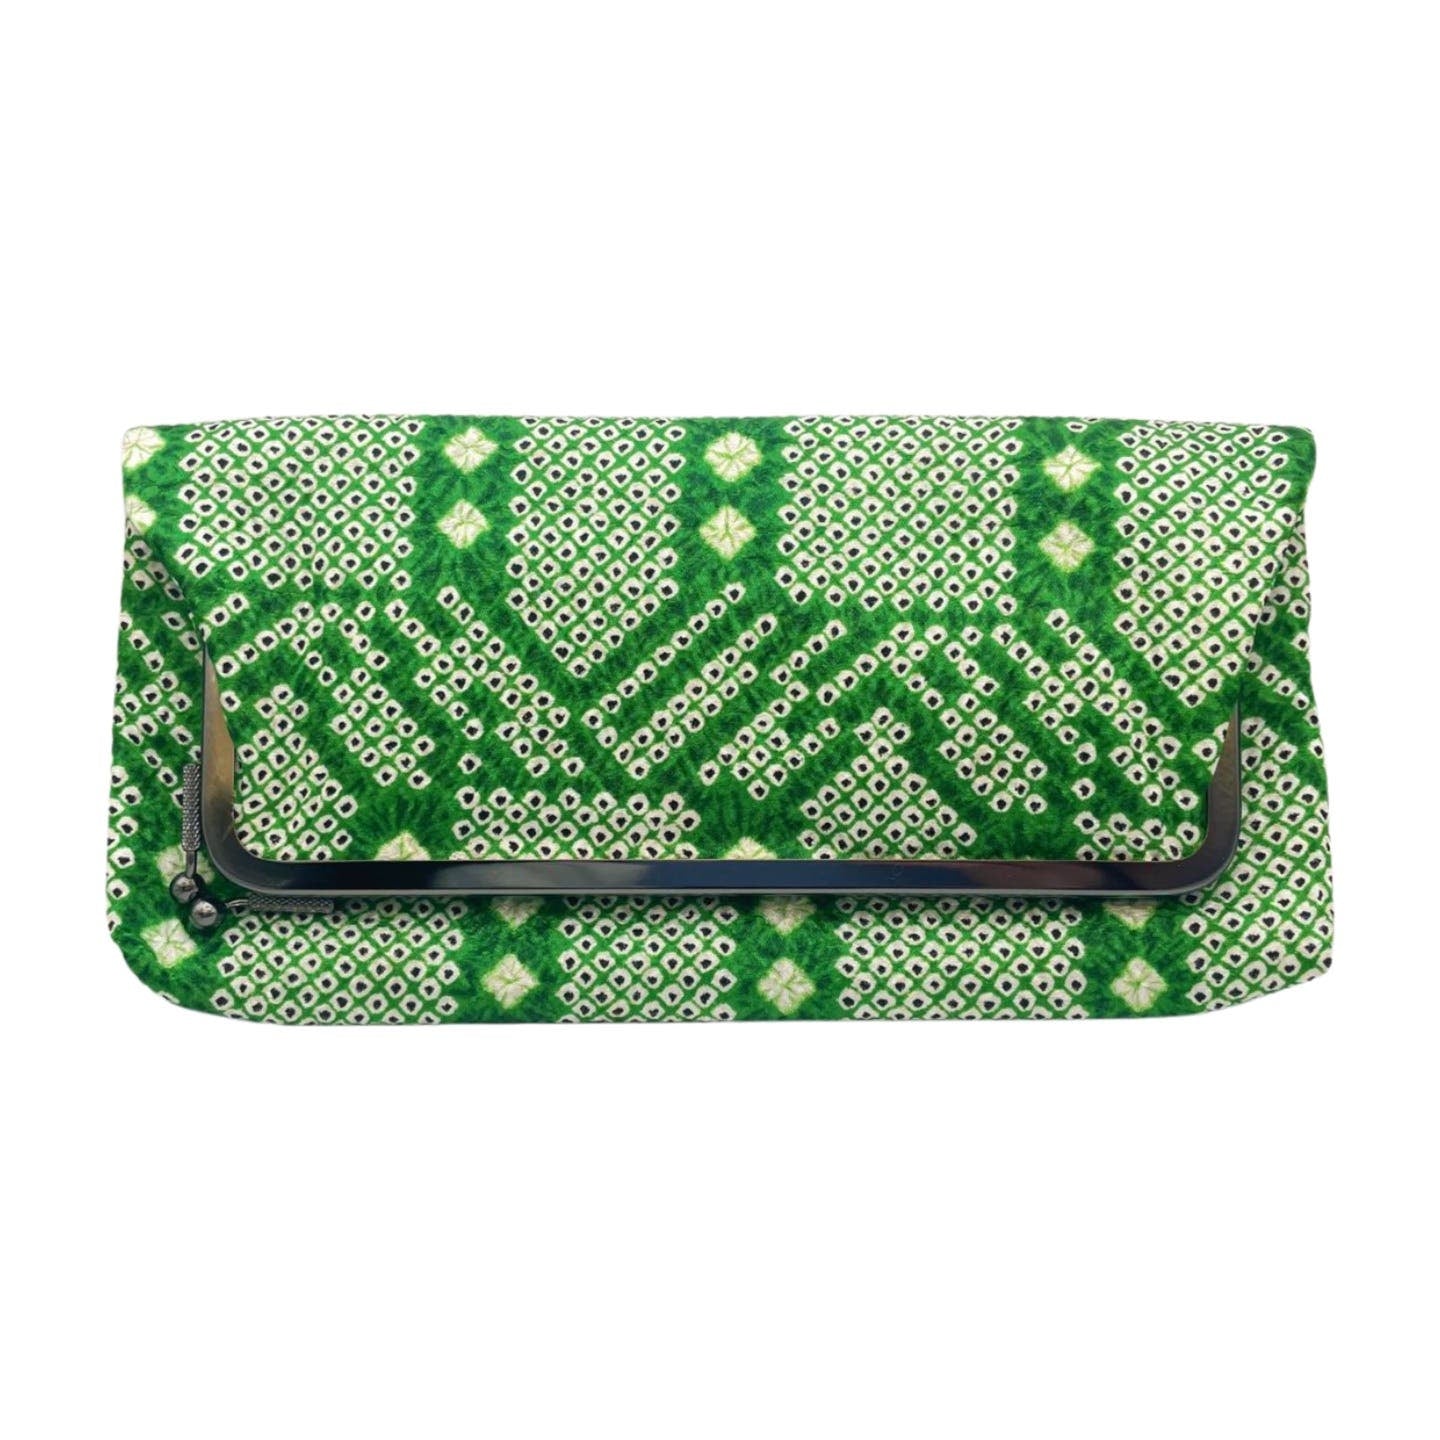 The Vintage 1970's Green Clutch features a vibrant green, white, and black geometric pattern on crinkled silk. It has a flap closure with a small black bar detail on the front. The intricate design includes alternating diamond and triangle shapes, complemented by a soft cotton lining inside.